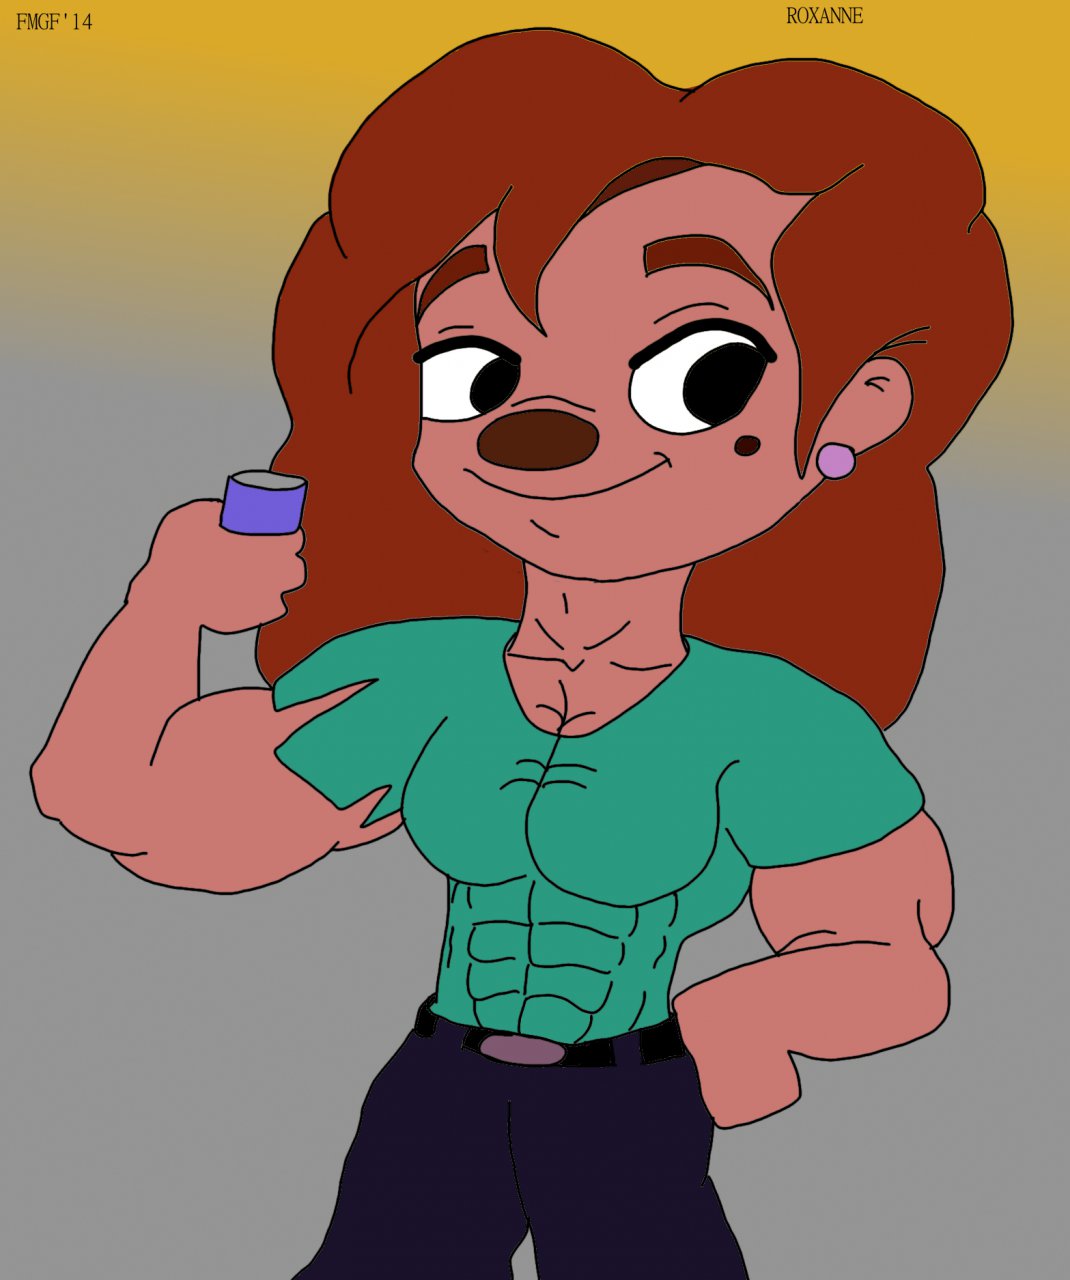 An extremely goofy movie roxanne